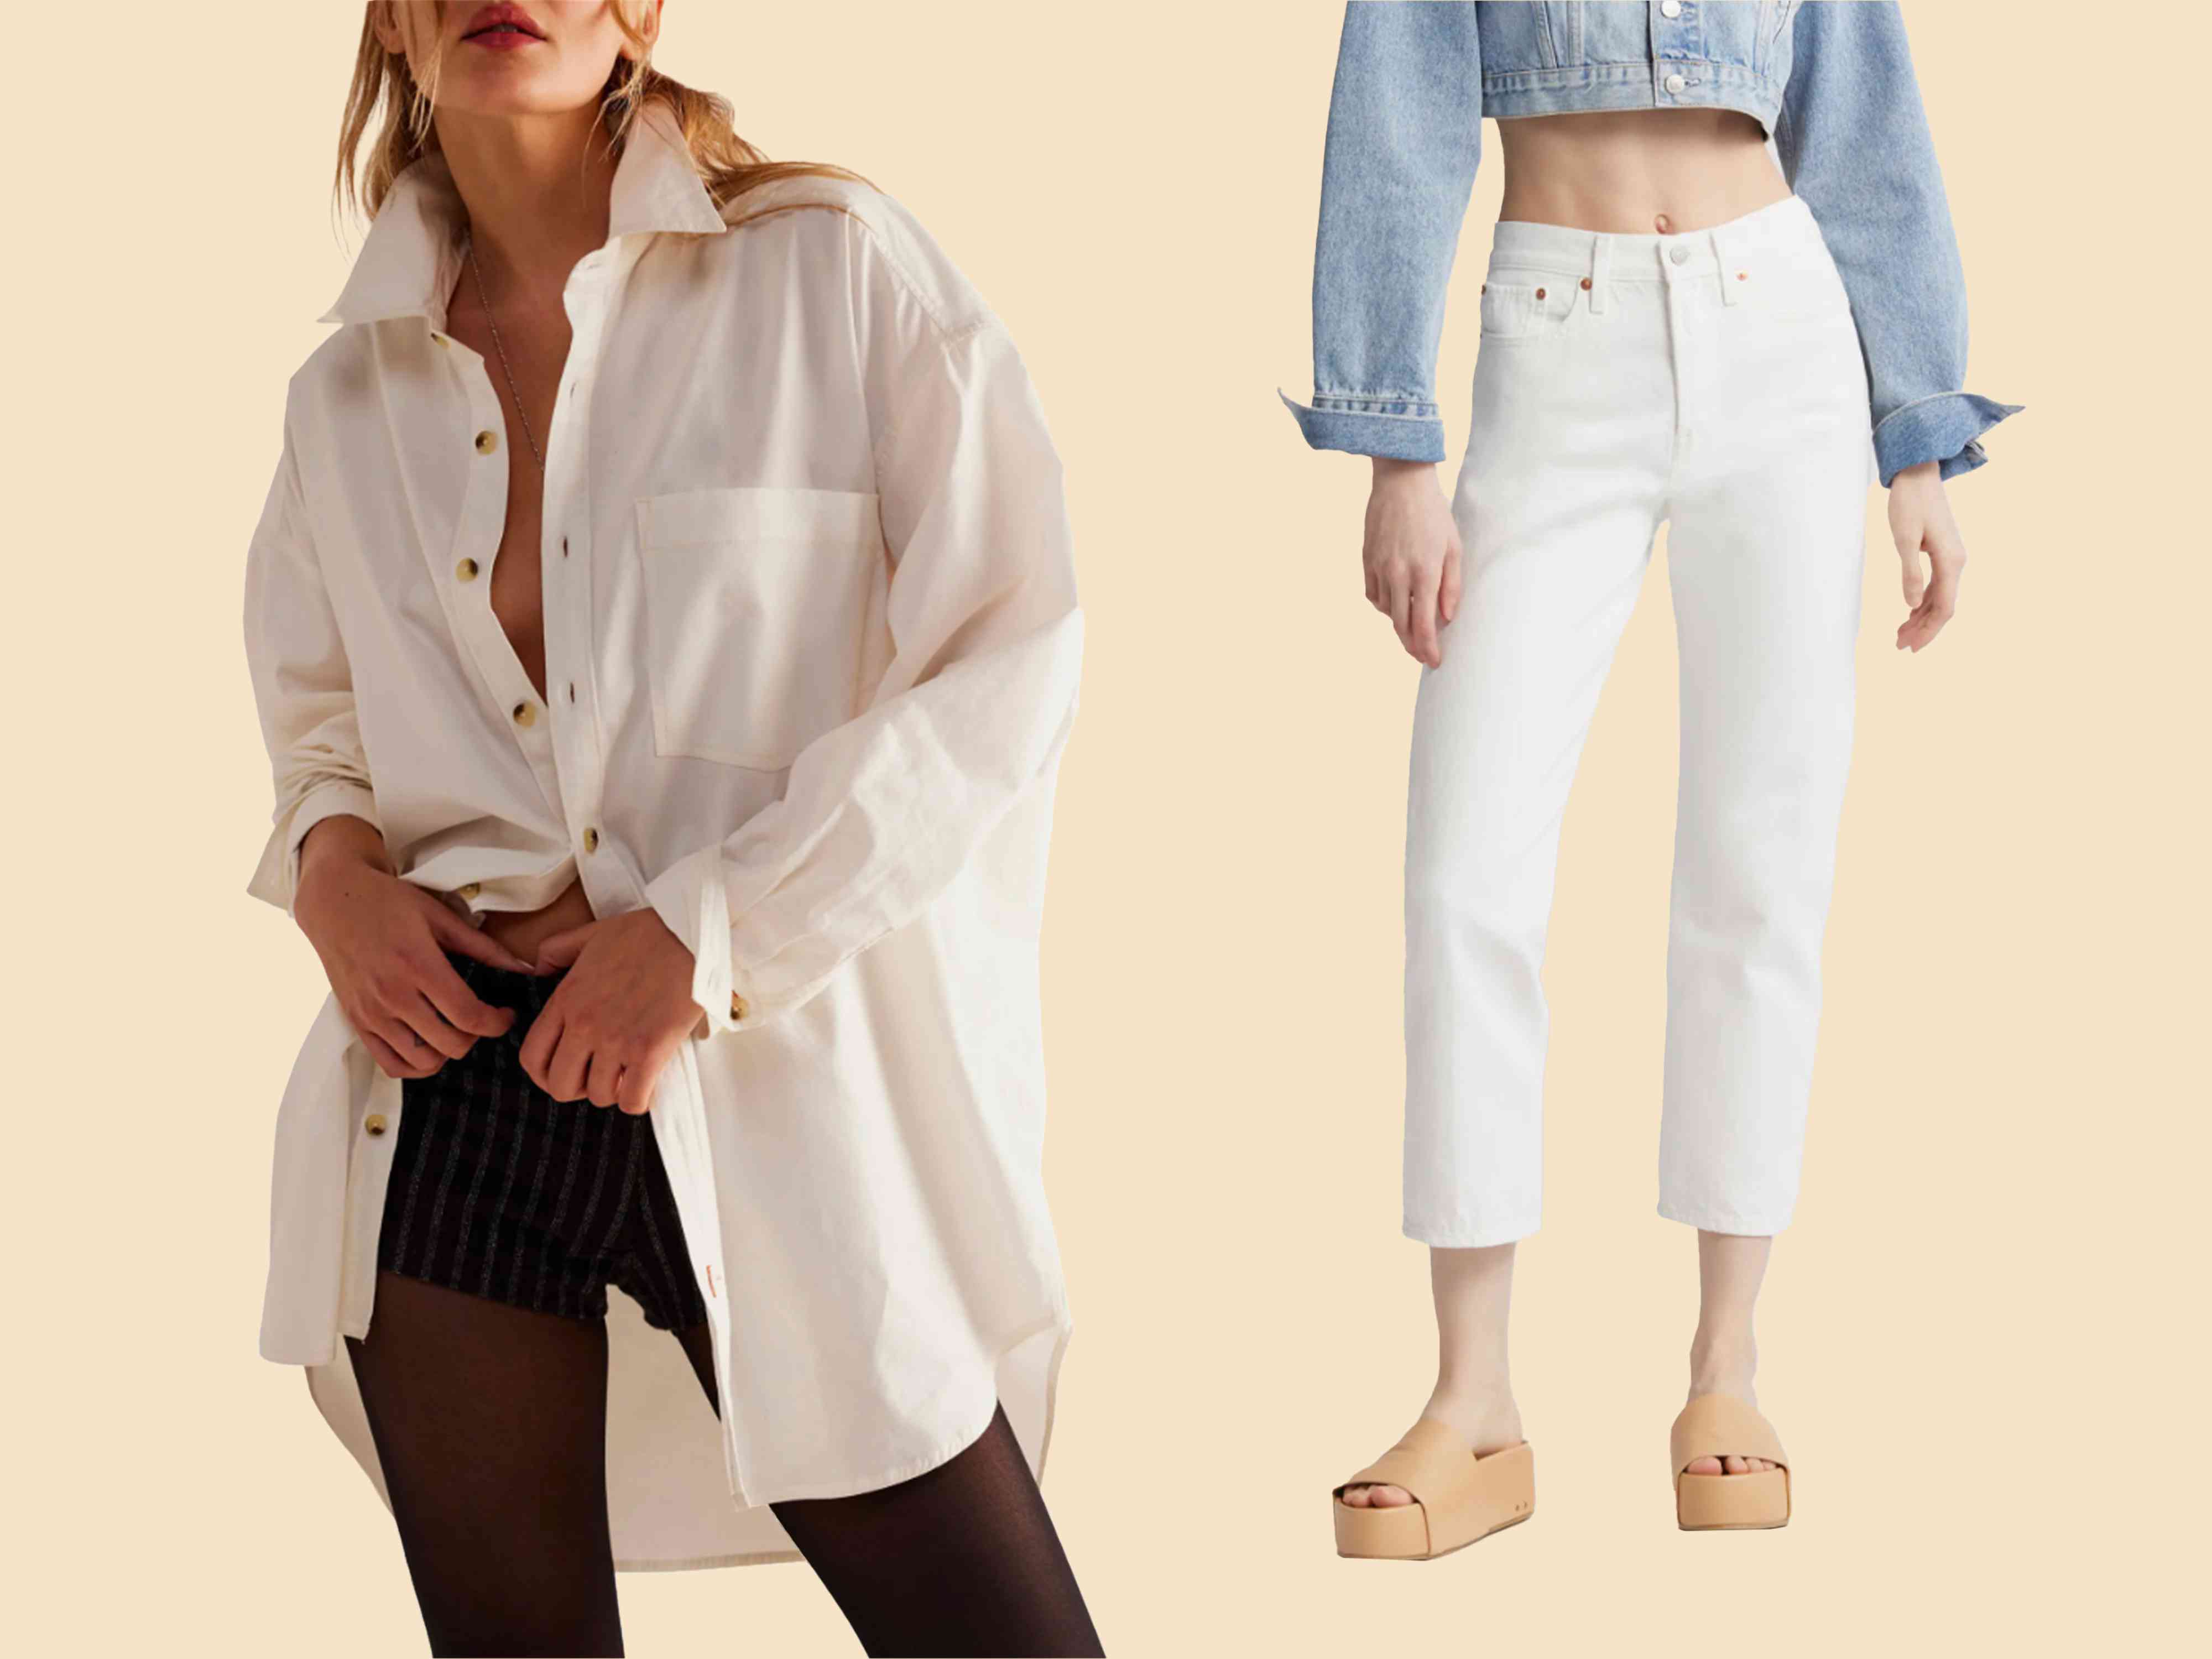 Nordstrom Just Added 8,000+ New Styles to Its Sale Section, and I’m Shopping These 8 Finds